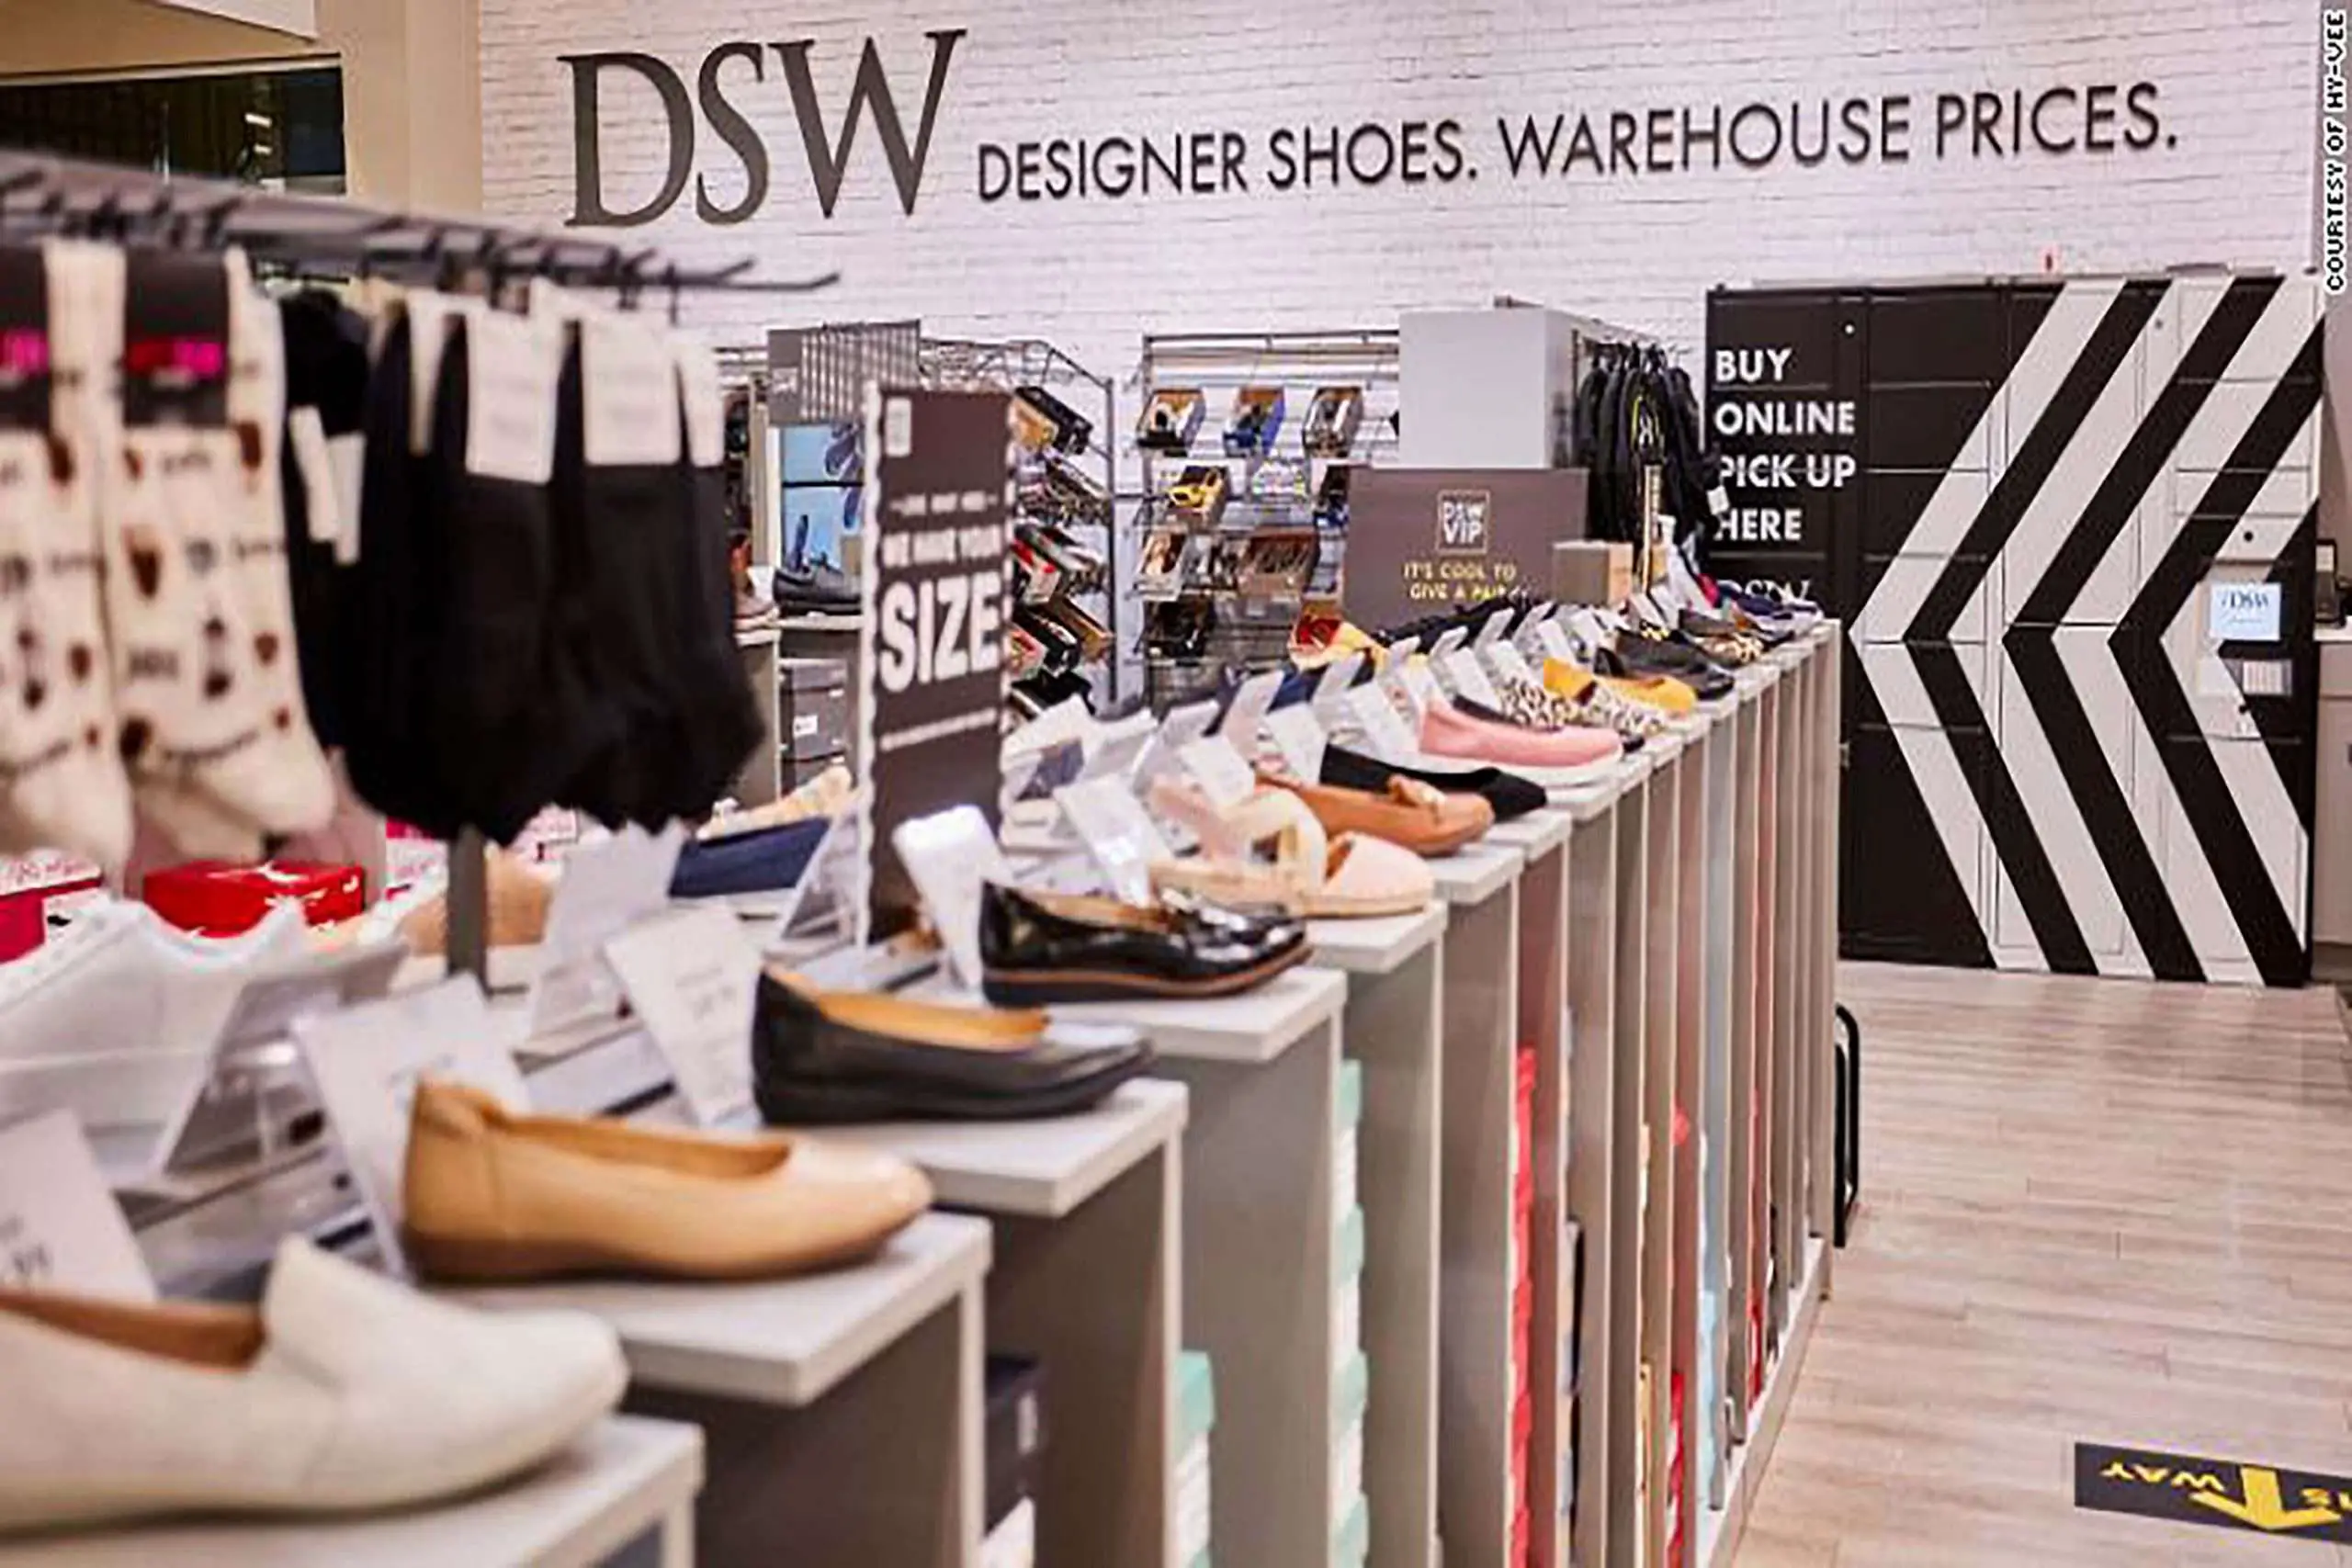 DSW is opening shoe stores inside supermarkets